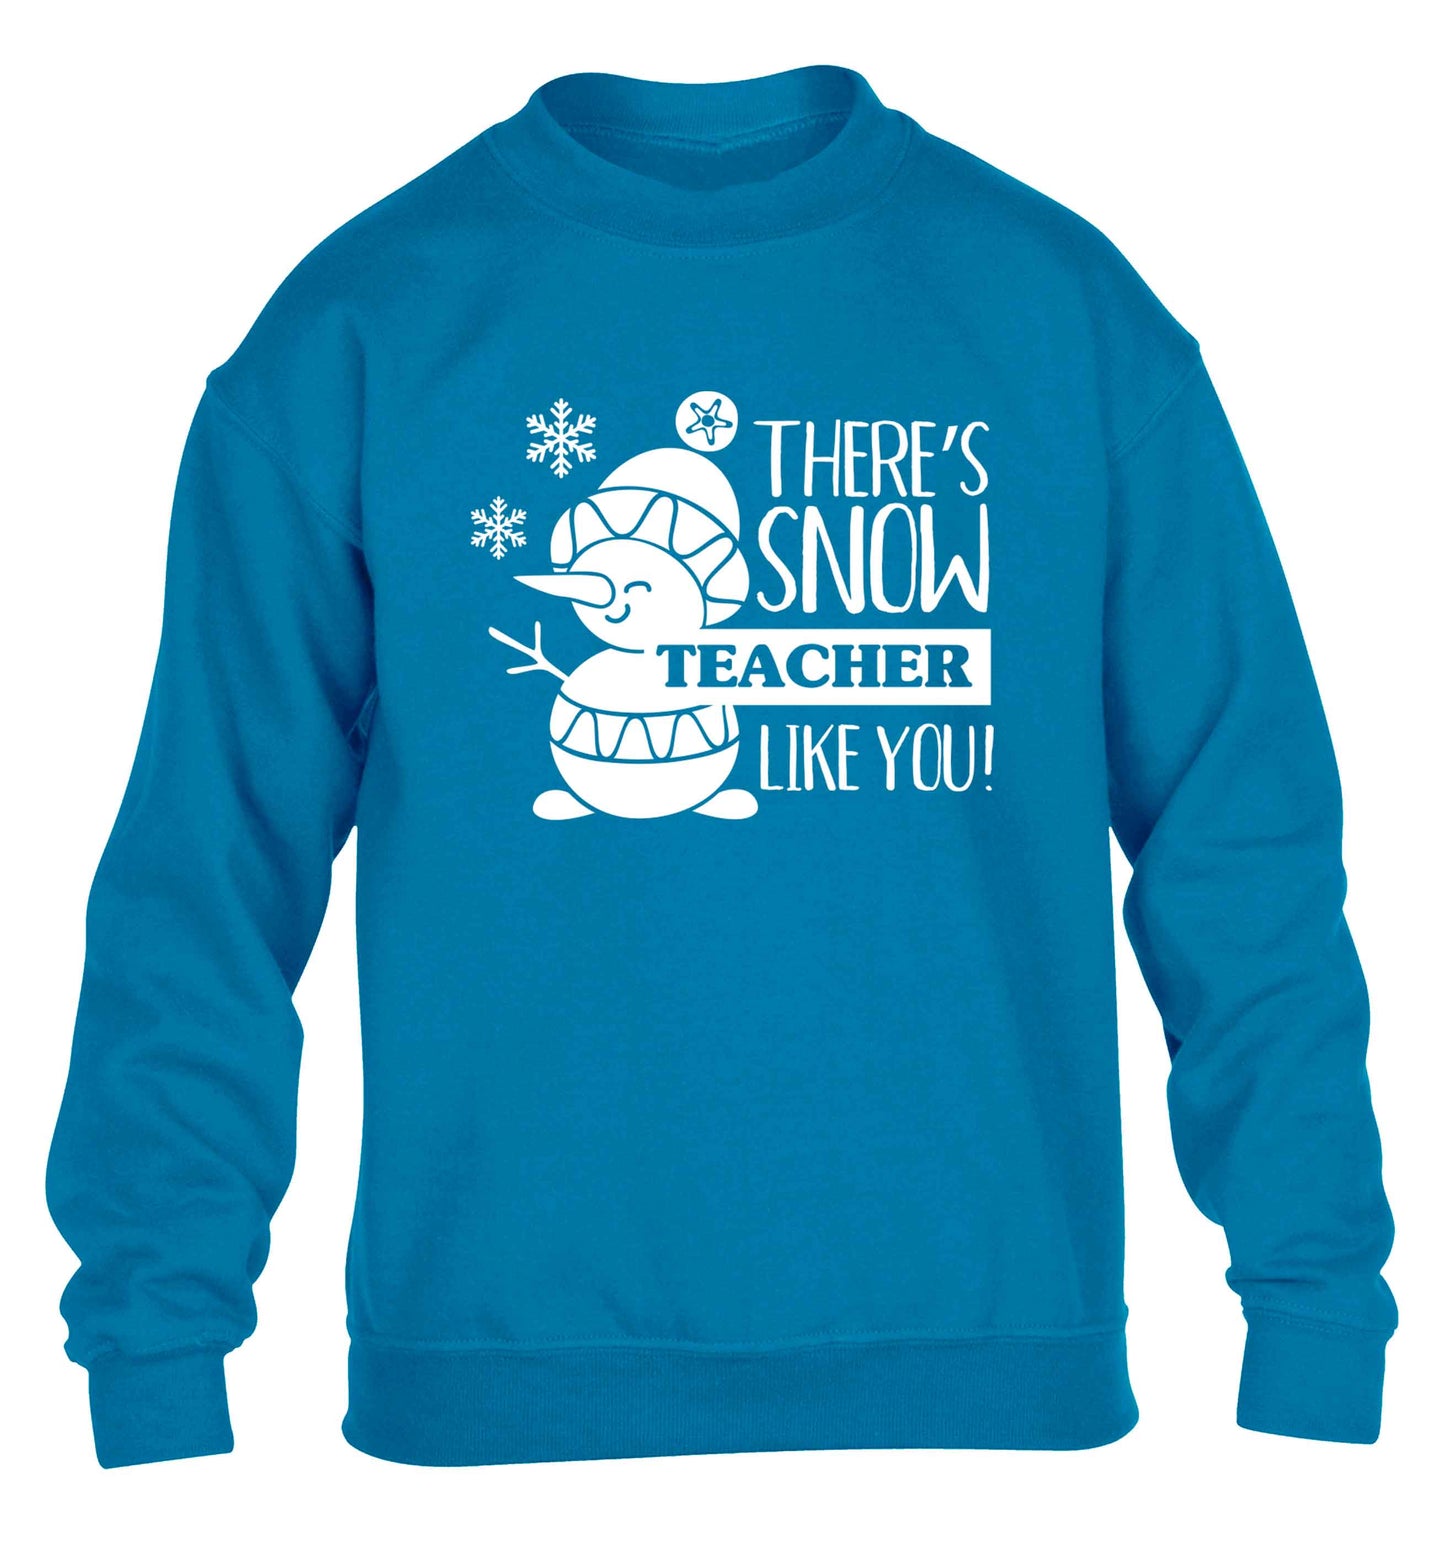 There's snow teacher like you children's blue sweater 12-13 Years